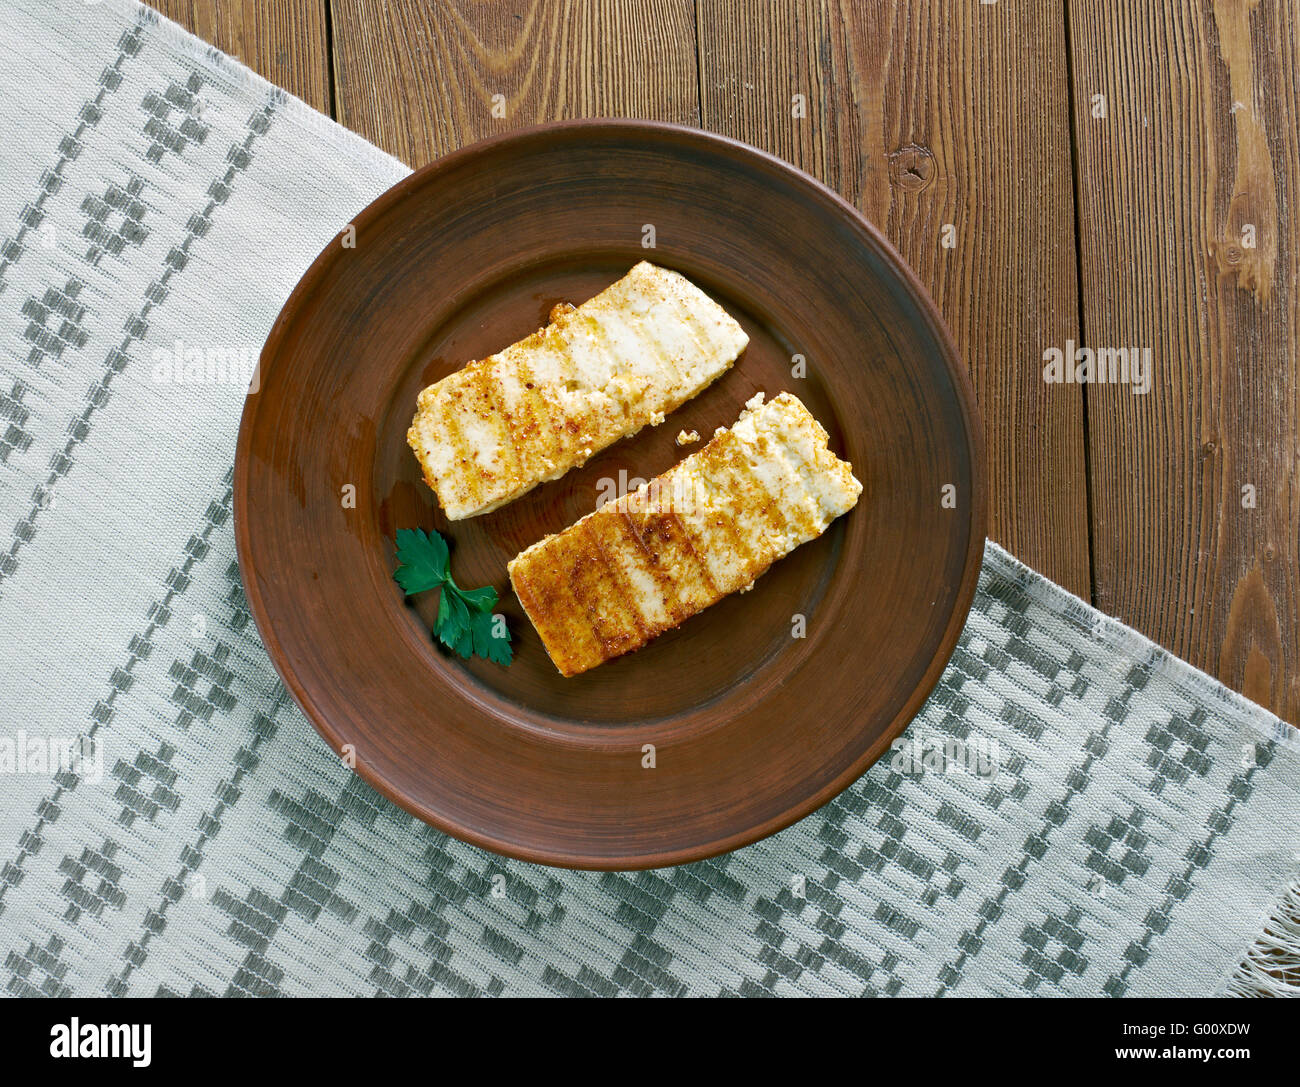 Grilled  Halloumi -  Cypriot semi-hard, unripened brined cheese. popular in the Levant, Greece and Turkey Stock Photo